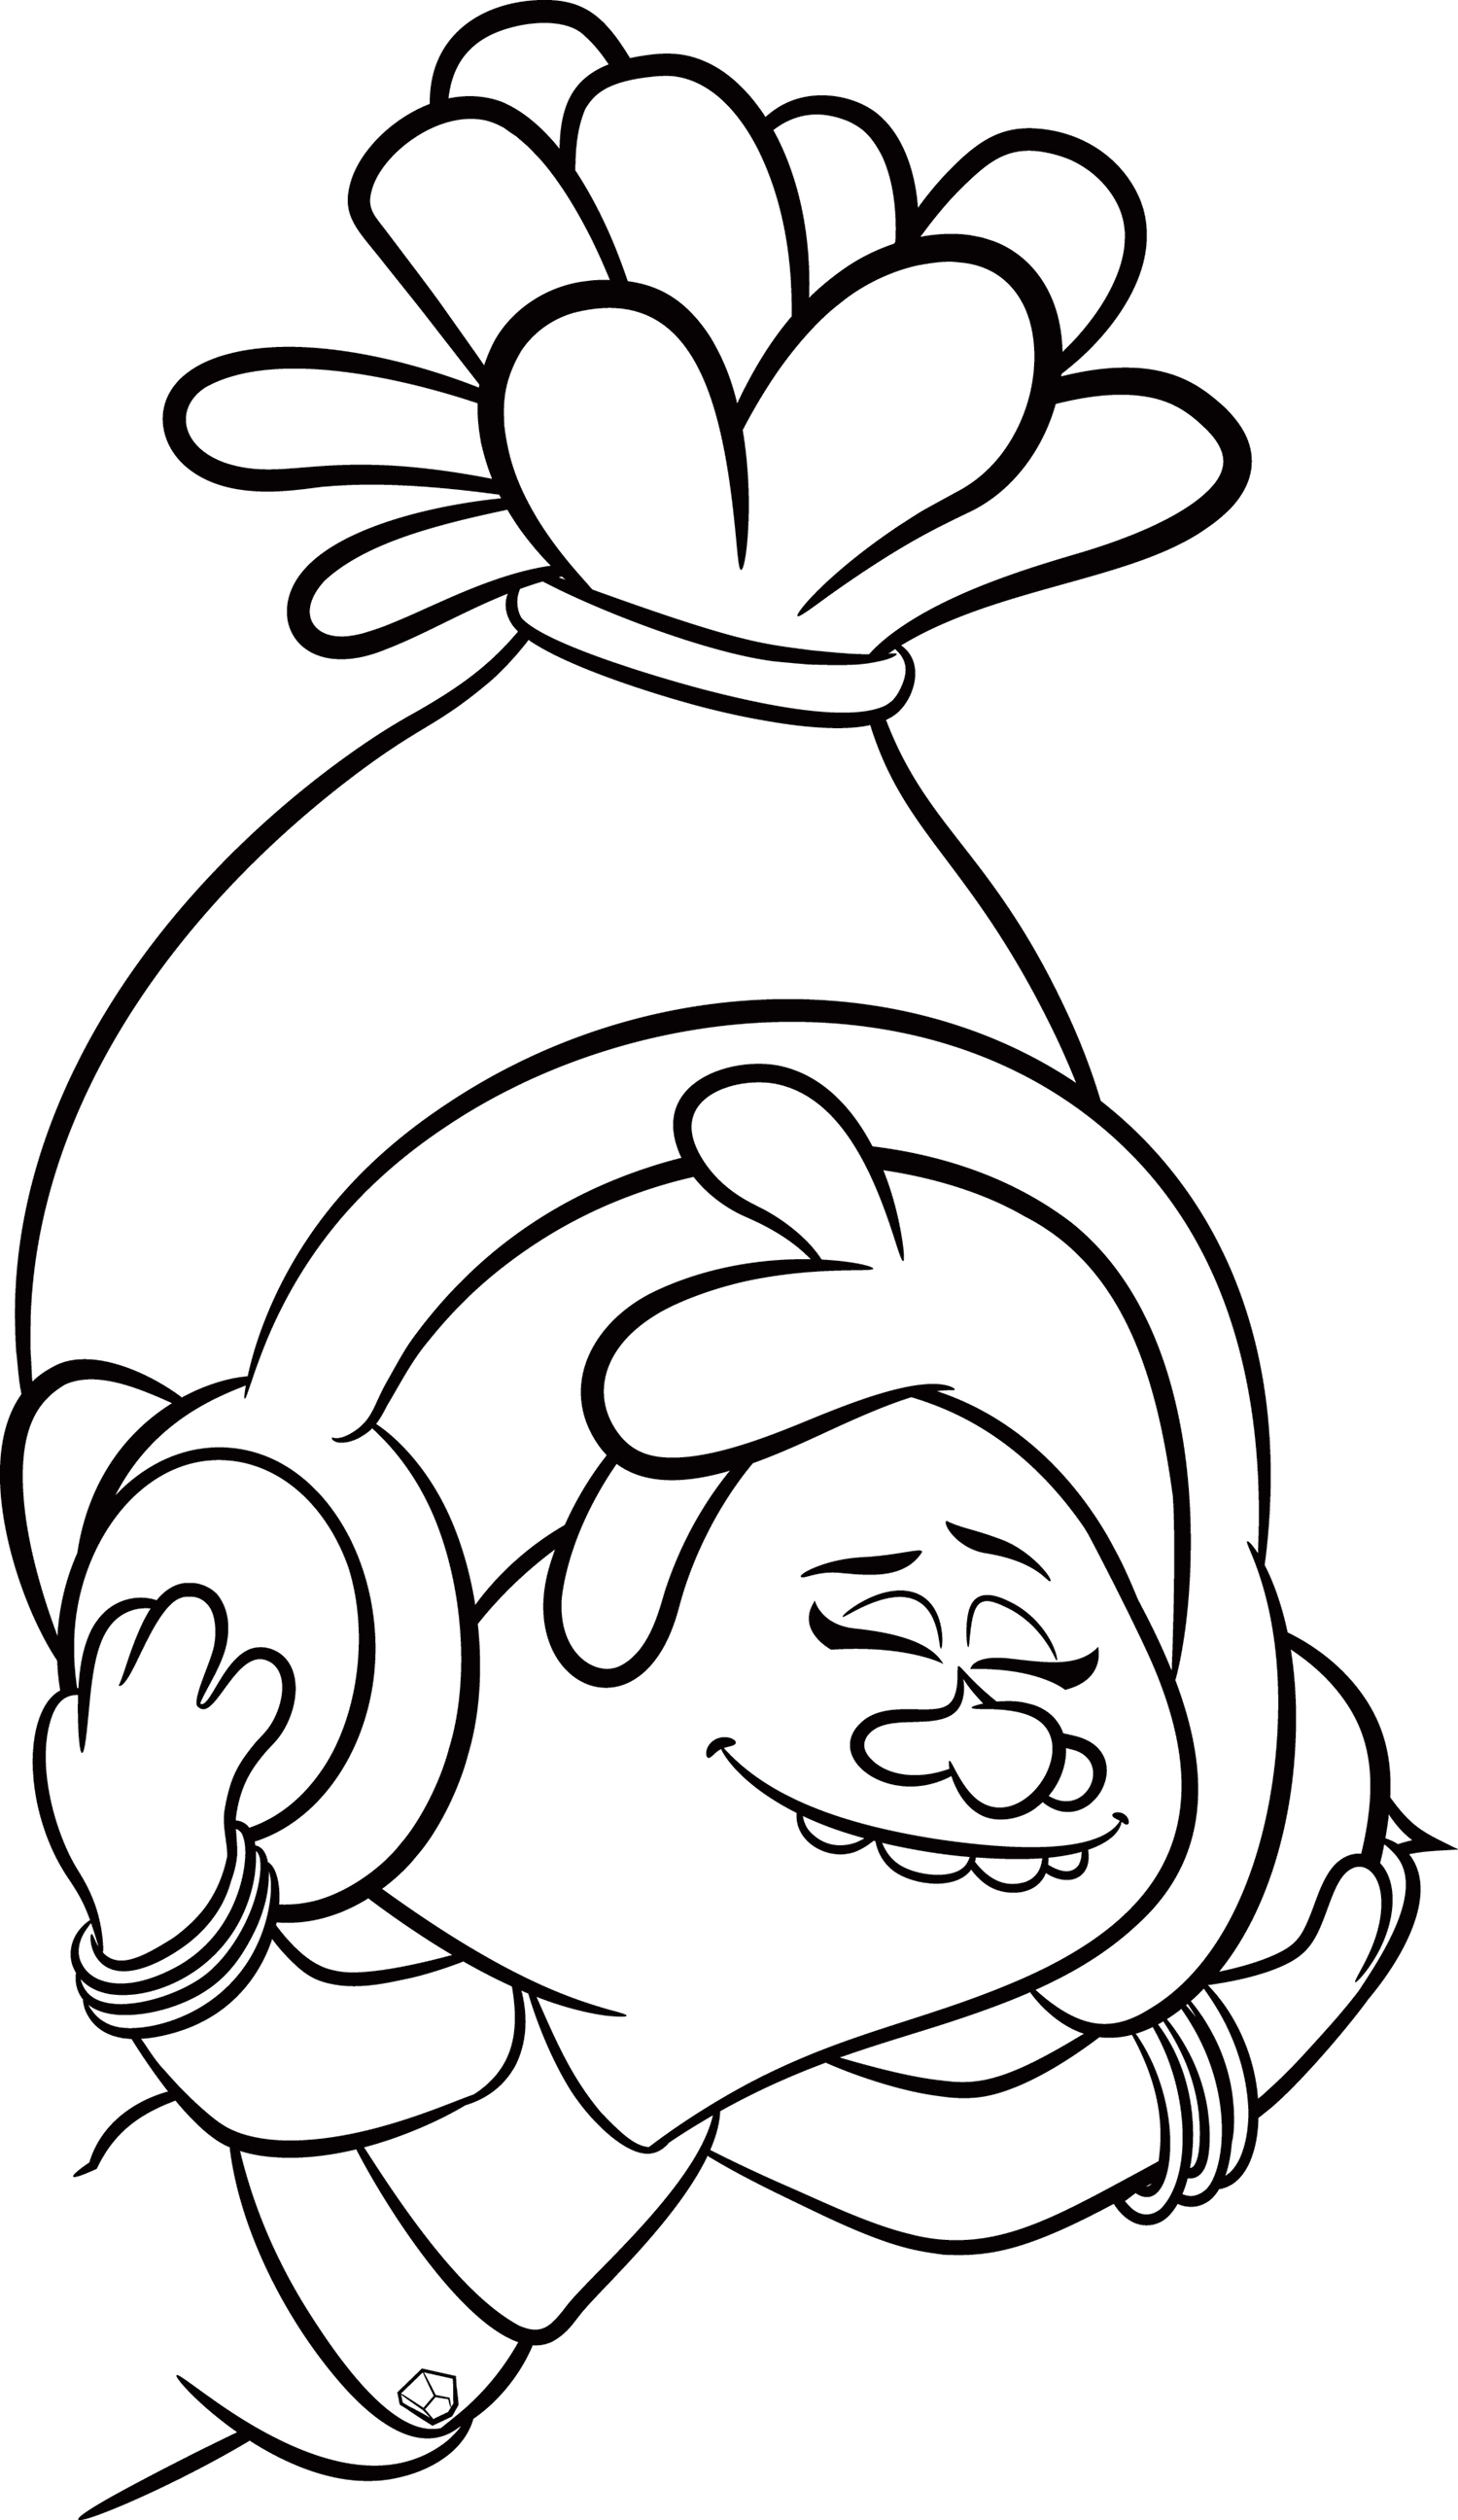 15 Troll Movie Coloring Pages